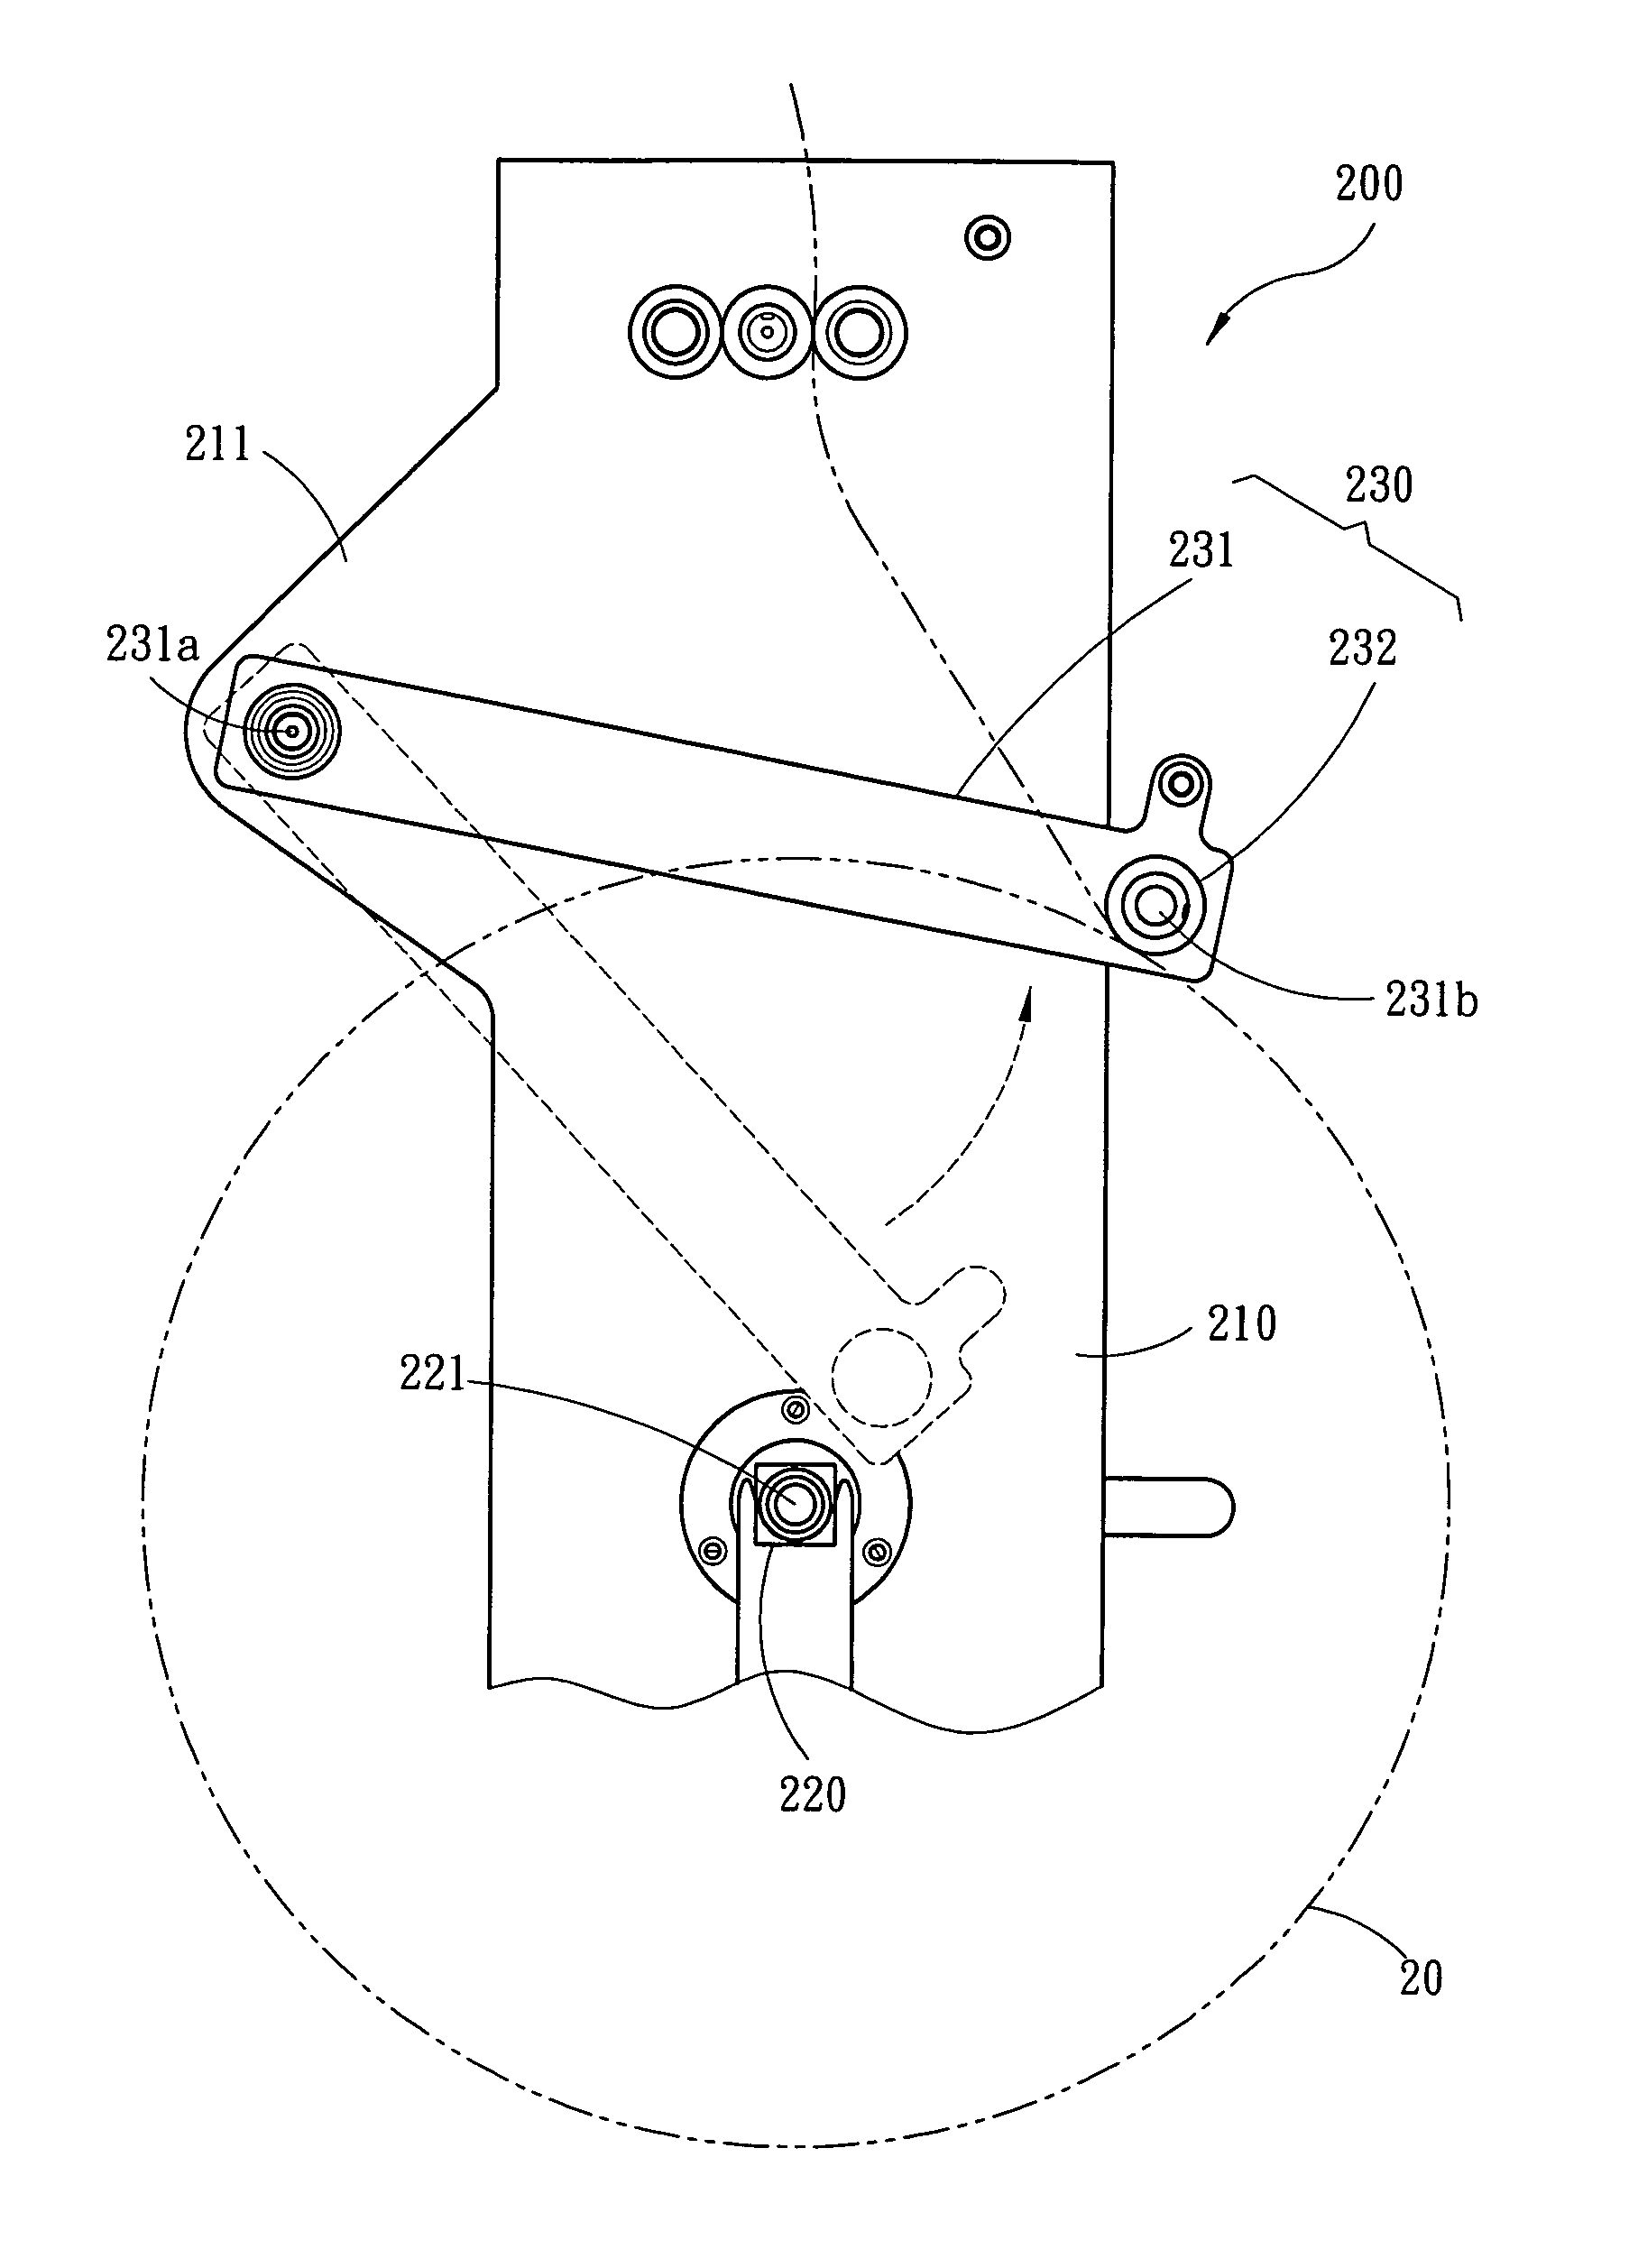 High-speed high-stand fabric take-up device with uniform fabric tautness arrangement